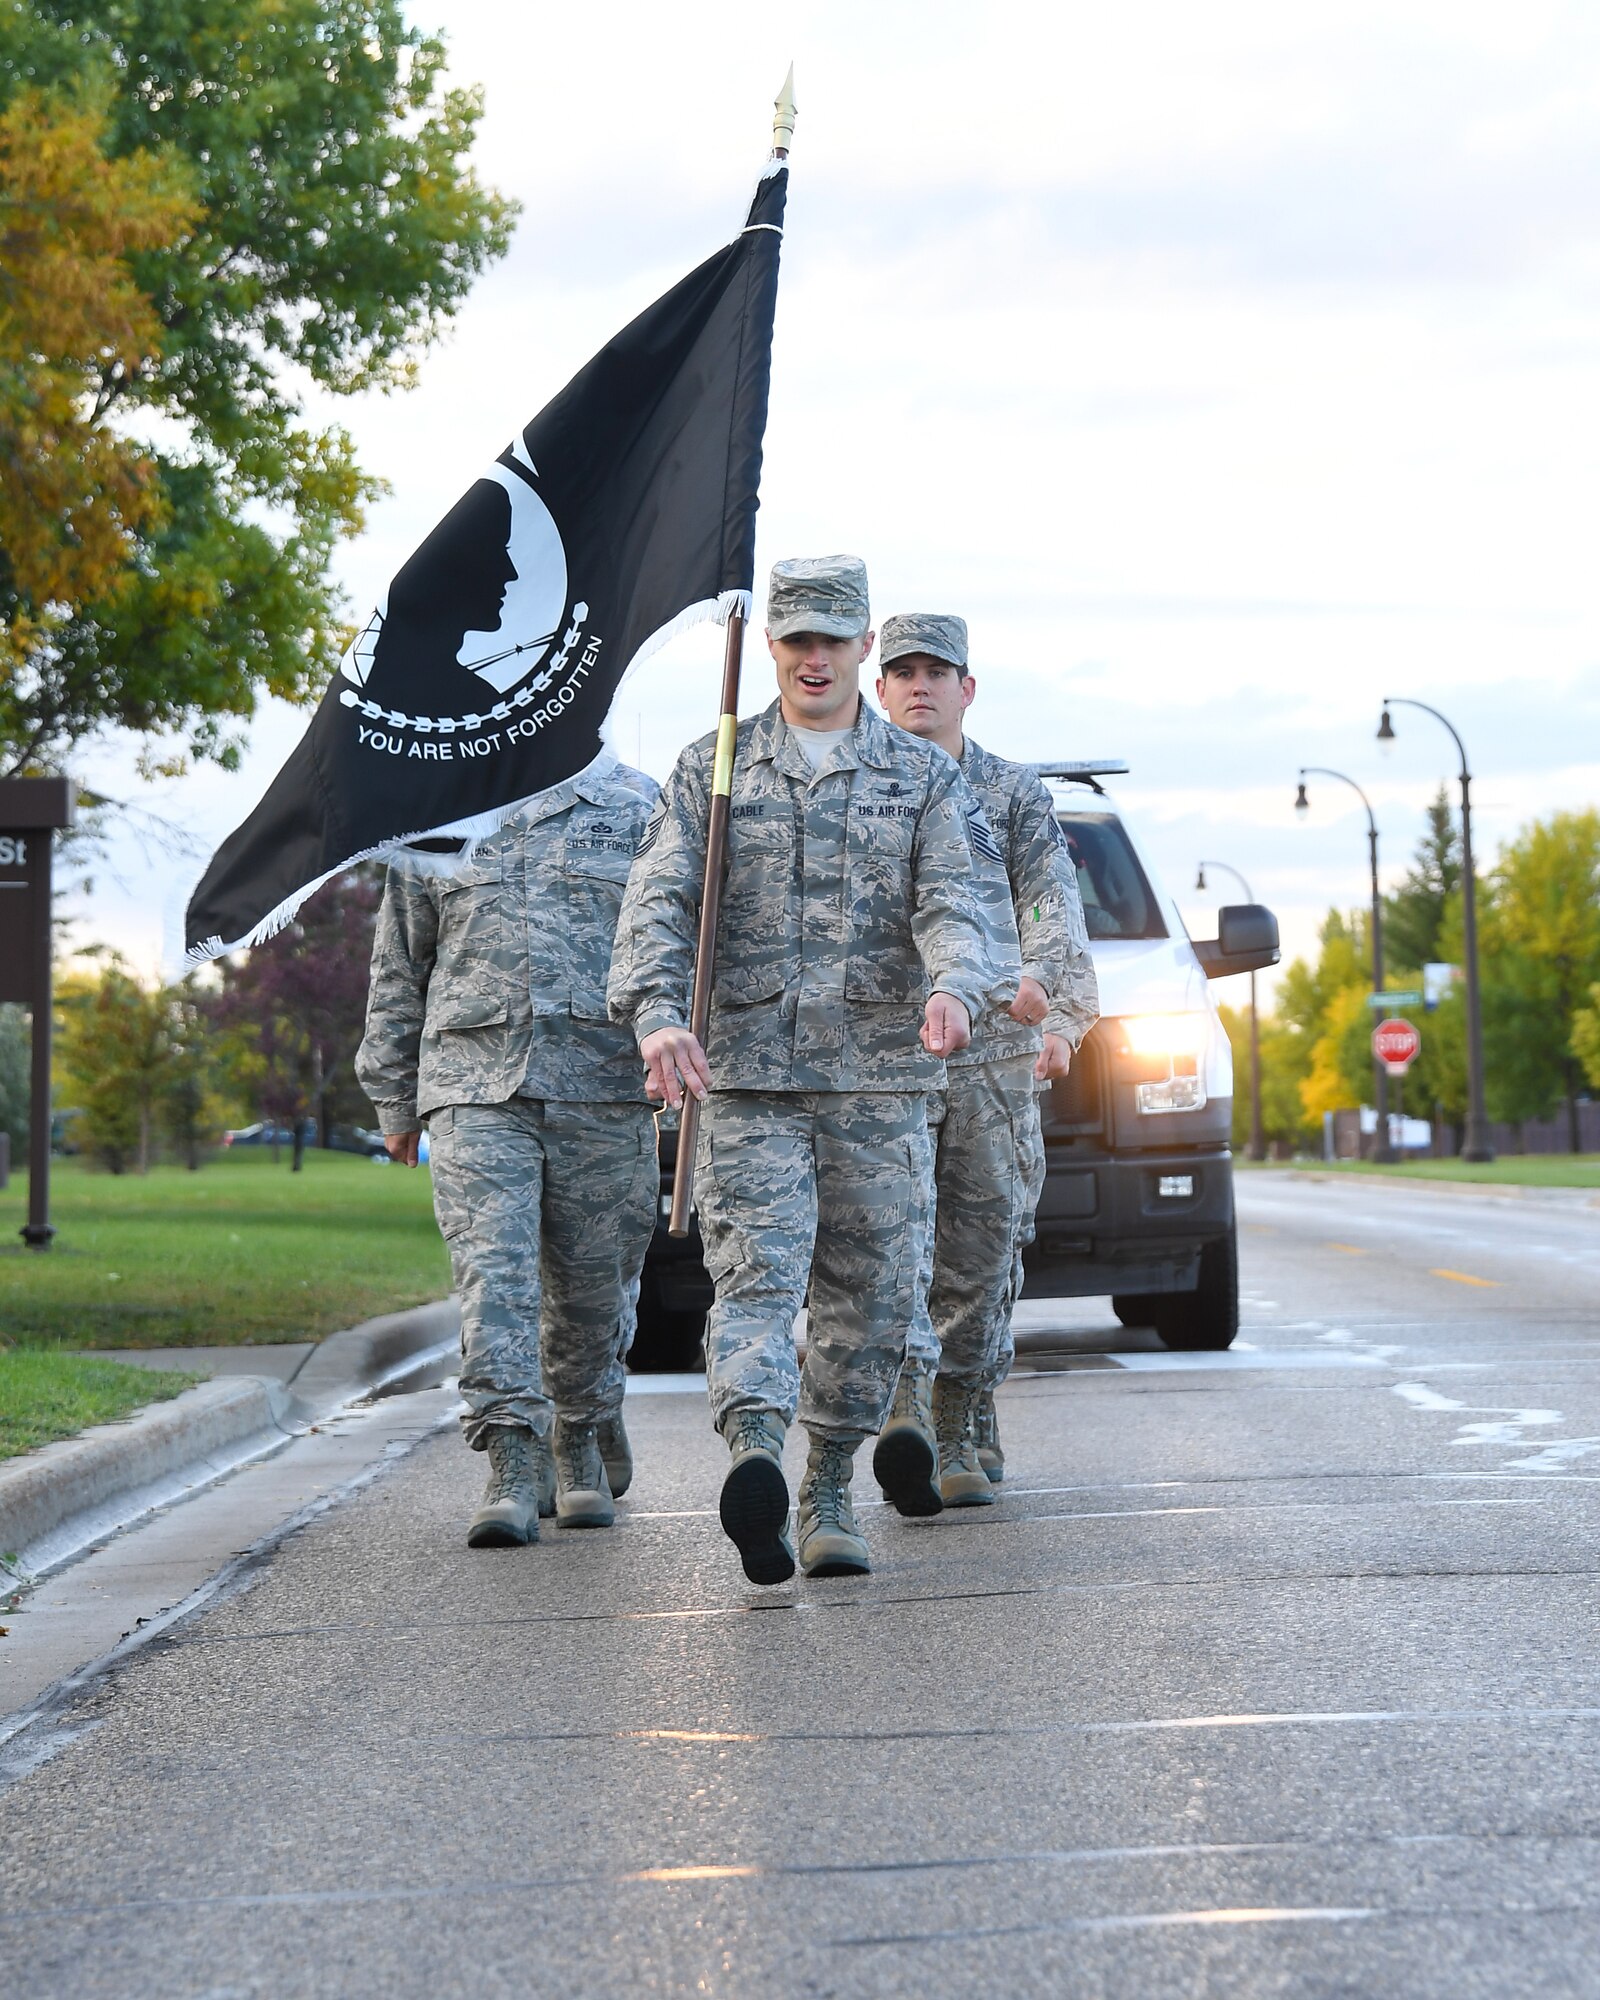 Master Sgt. Daniel Cable, 319th Operations Support Squadron fire sergeant, center, calls cadence as he leads an element to the base honor guard building for a POW/MIA ceremony September 21, 2018, on Grand Forks Air Force Base, North Dakota. Prior to the ceremony, the POW/MIA flag was kept in motion by base Airmen who carried it during a 24-hour run. (U.S. Air Force photo by Airman 1st Class Elora J. Martinez)